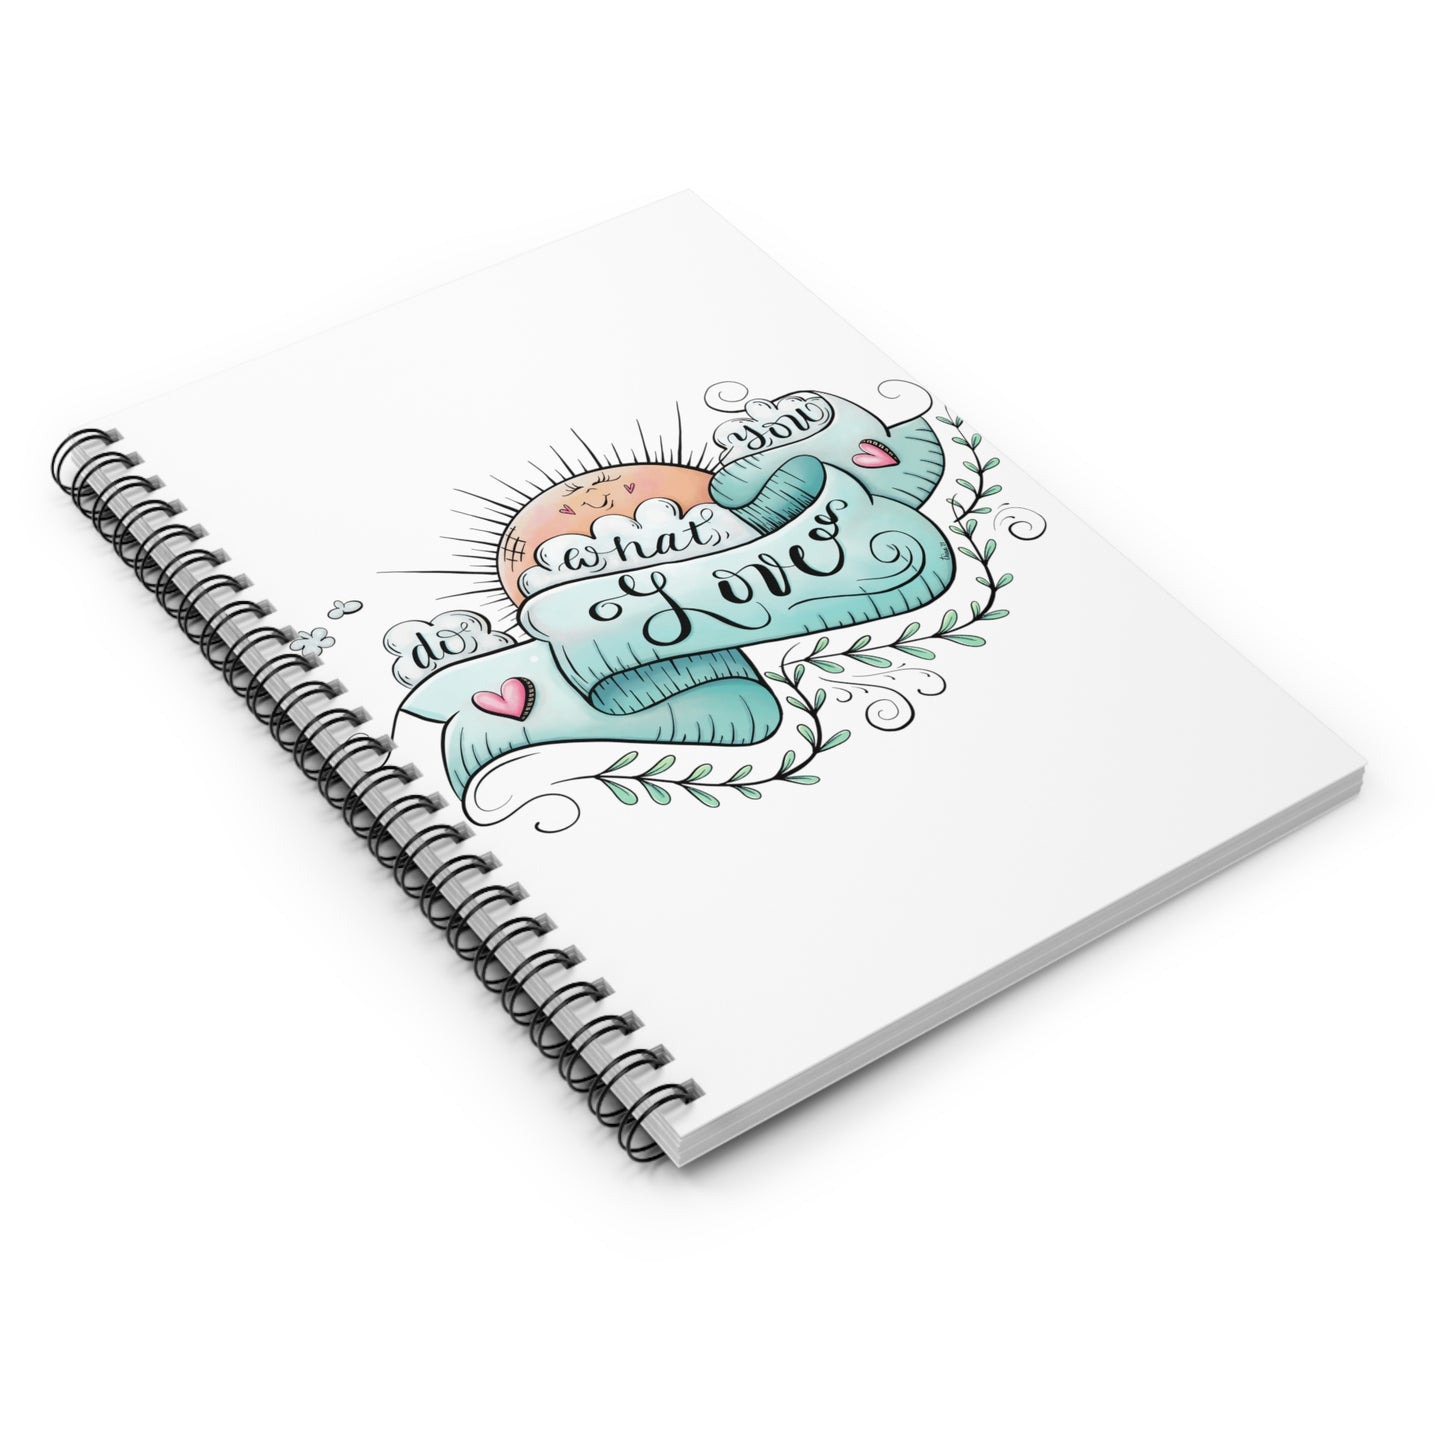 Do What You Love Spiral Notebook - Ruled Line